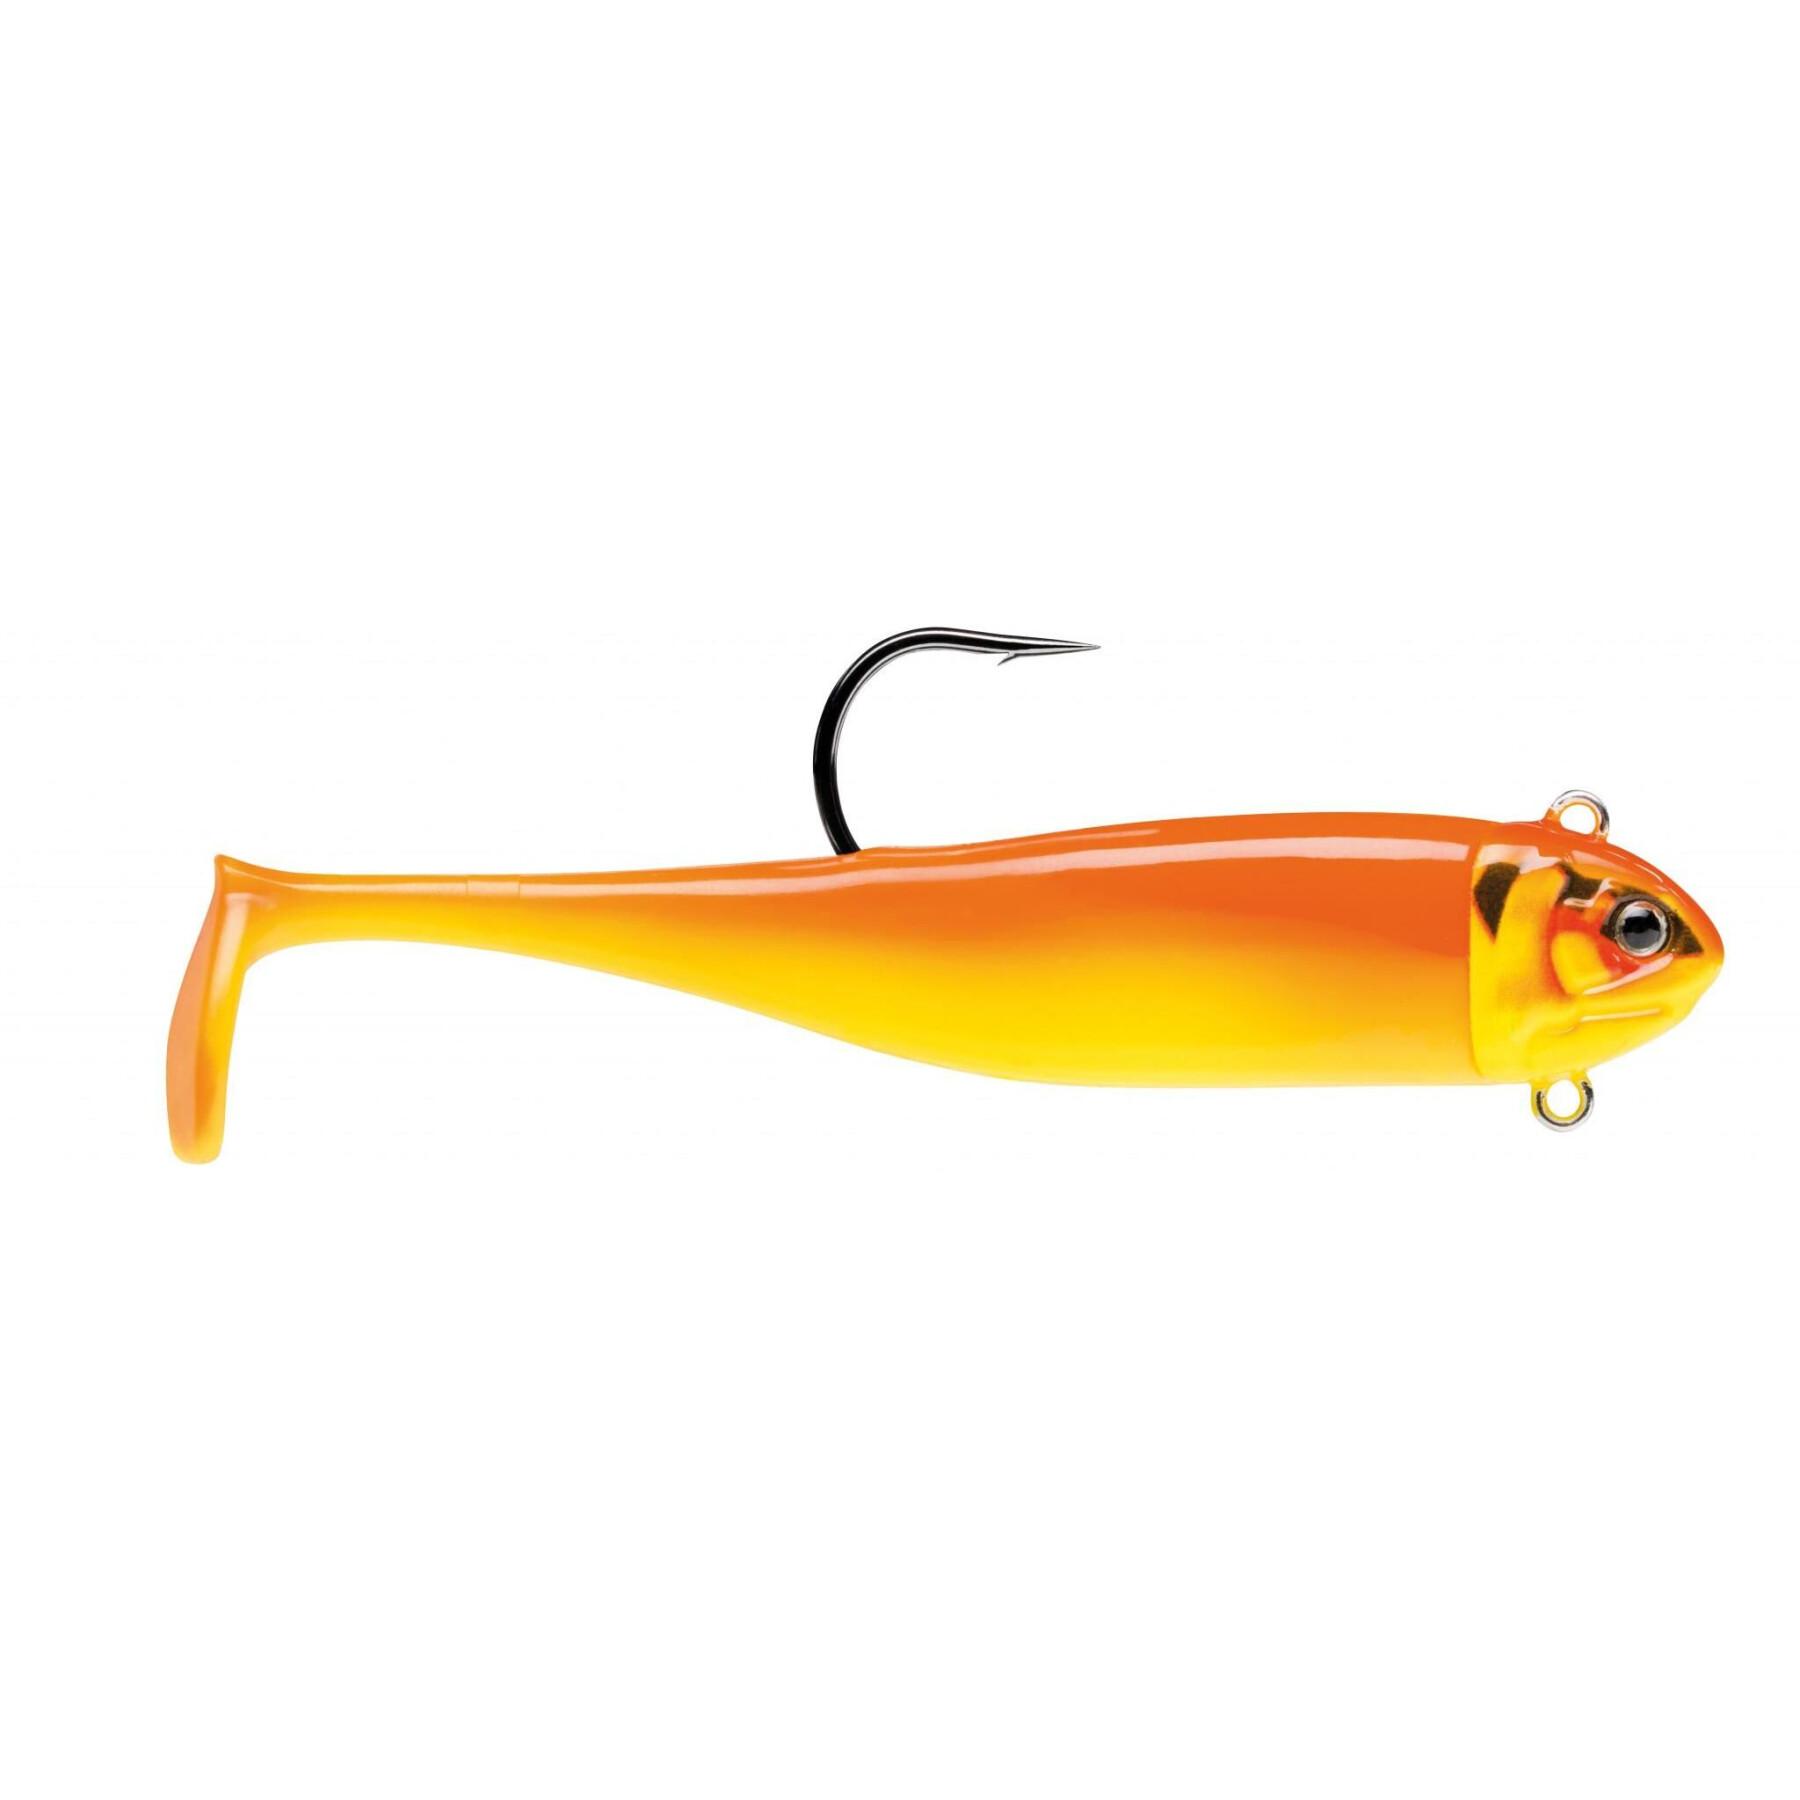 Lure Storm Biscay Minnow – 46g